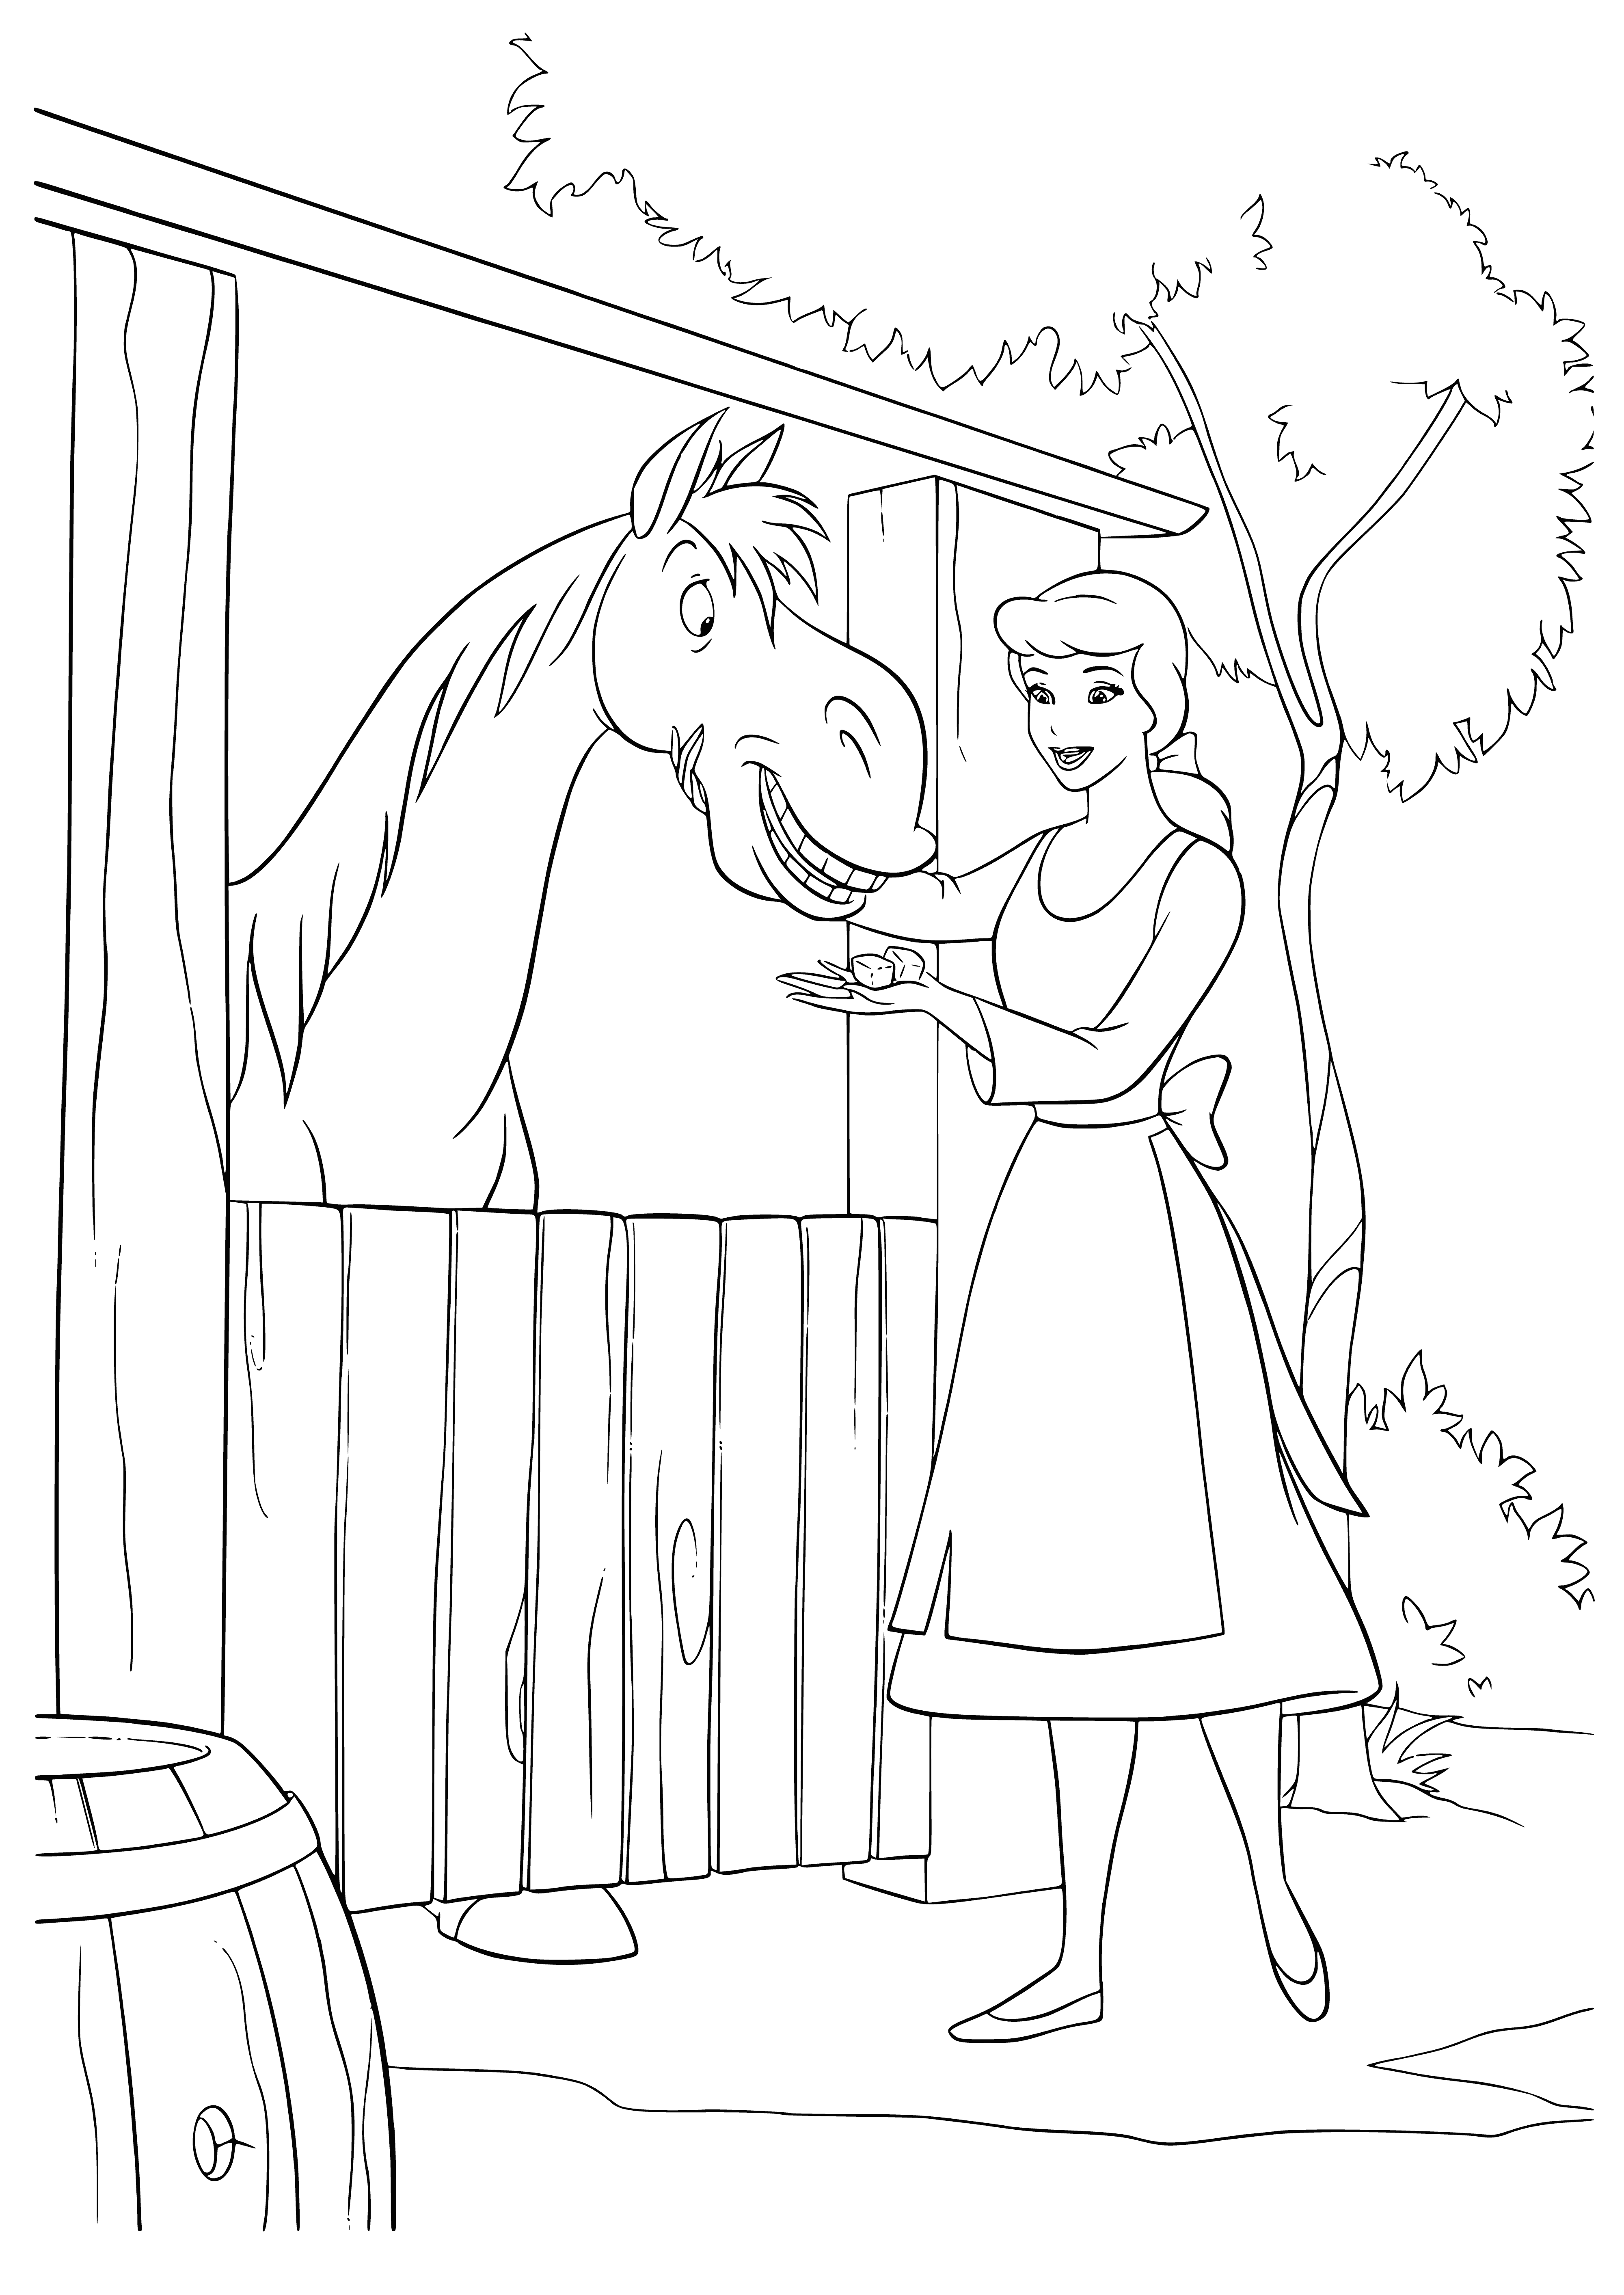 coloring page: Cinderella feeds a horse from a bucket in a light blue dress and her hair in a bun. She looks happy!